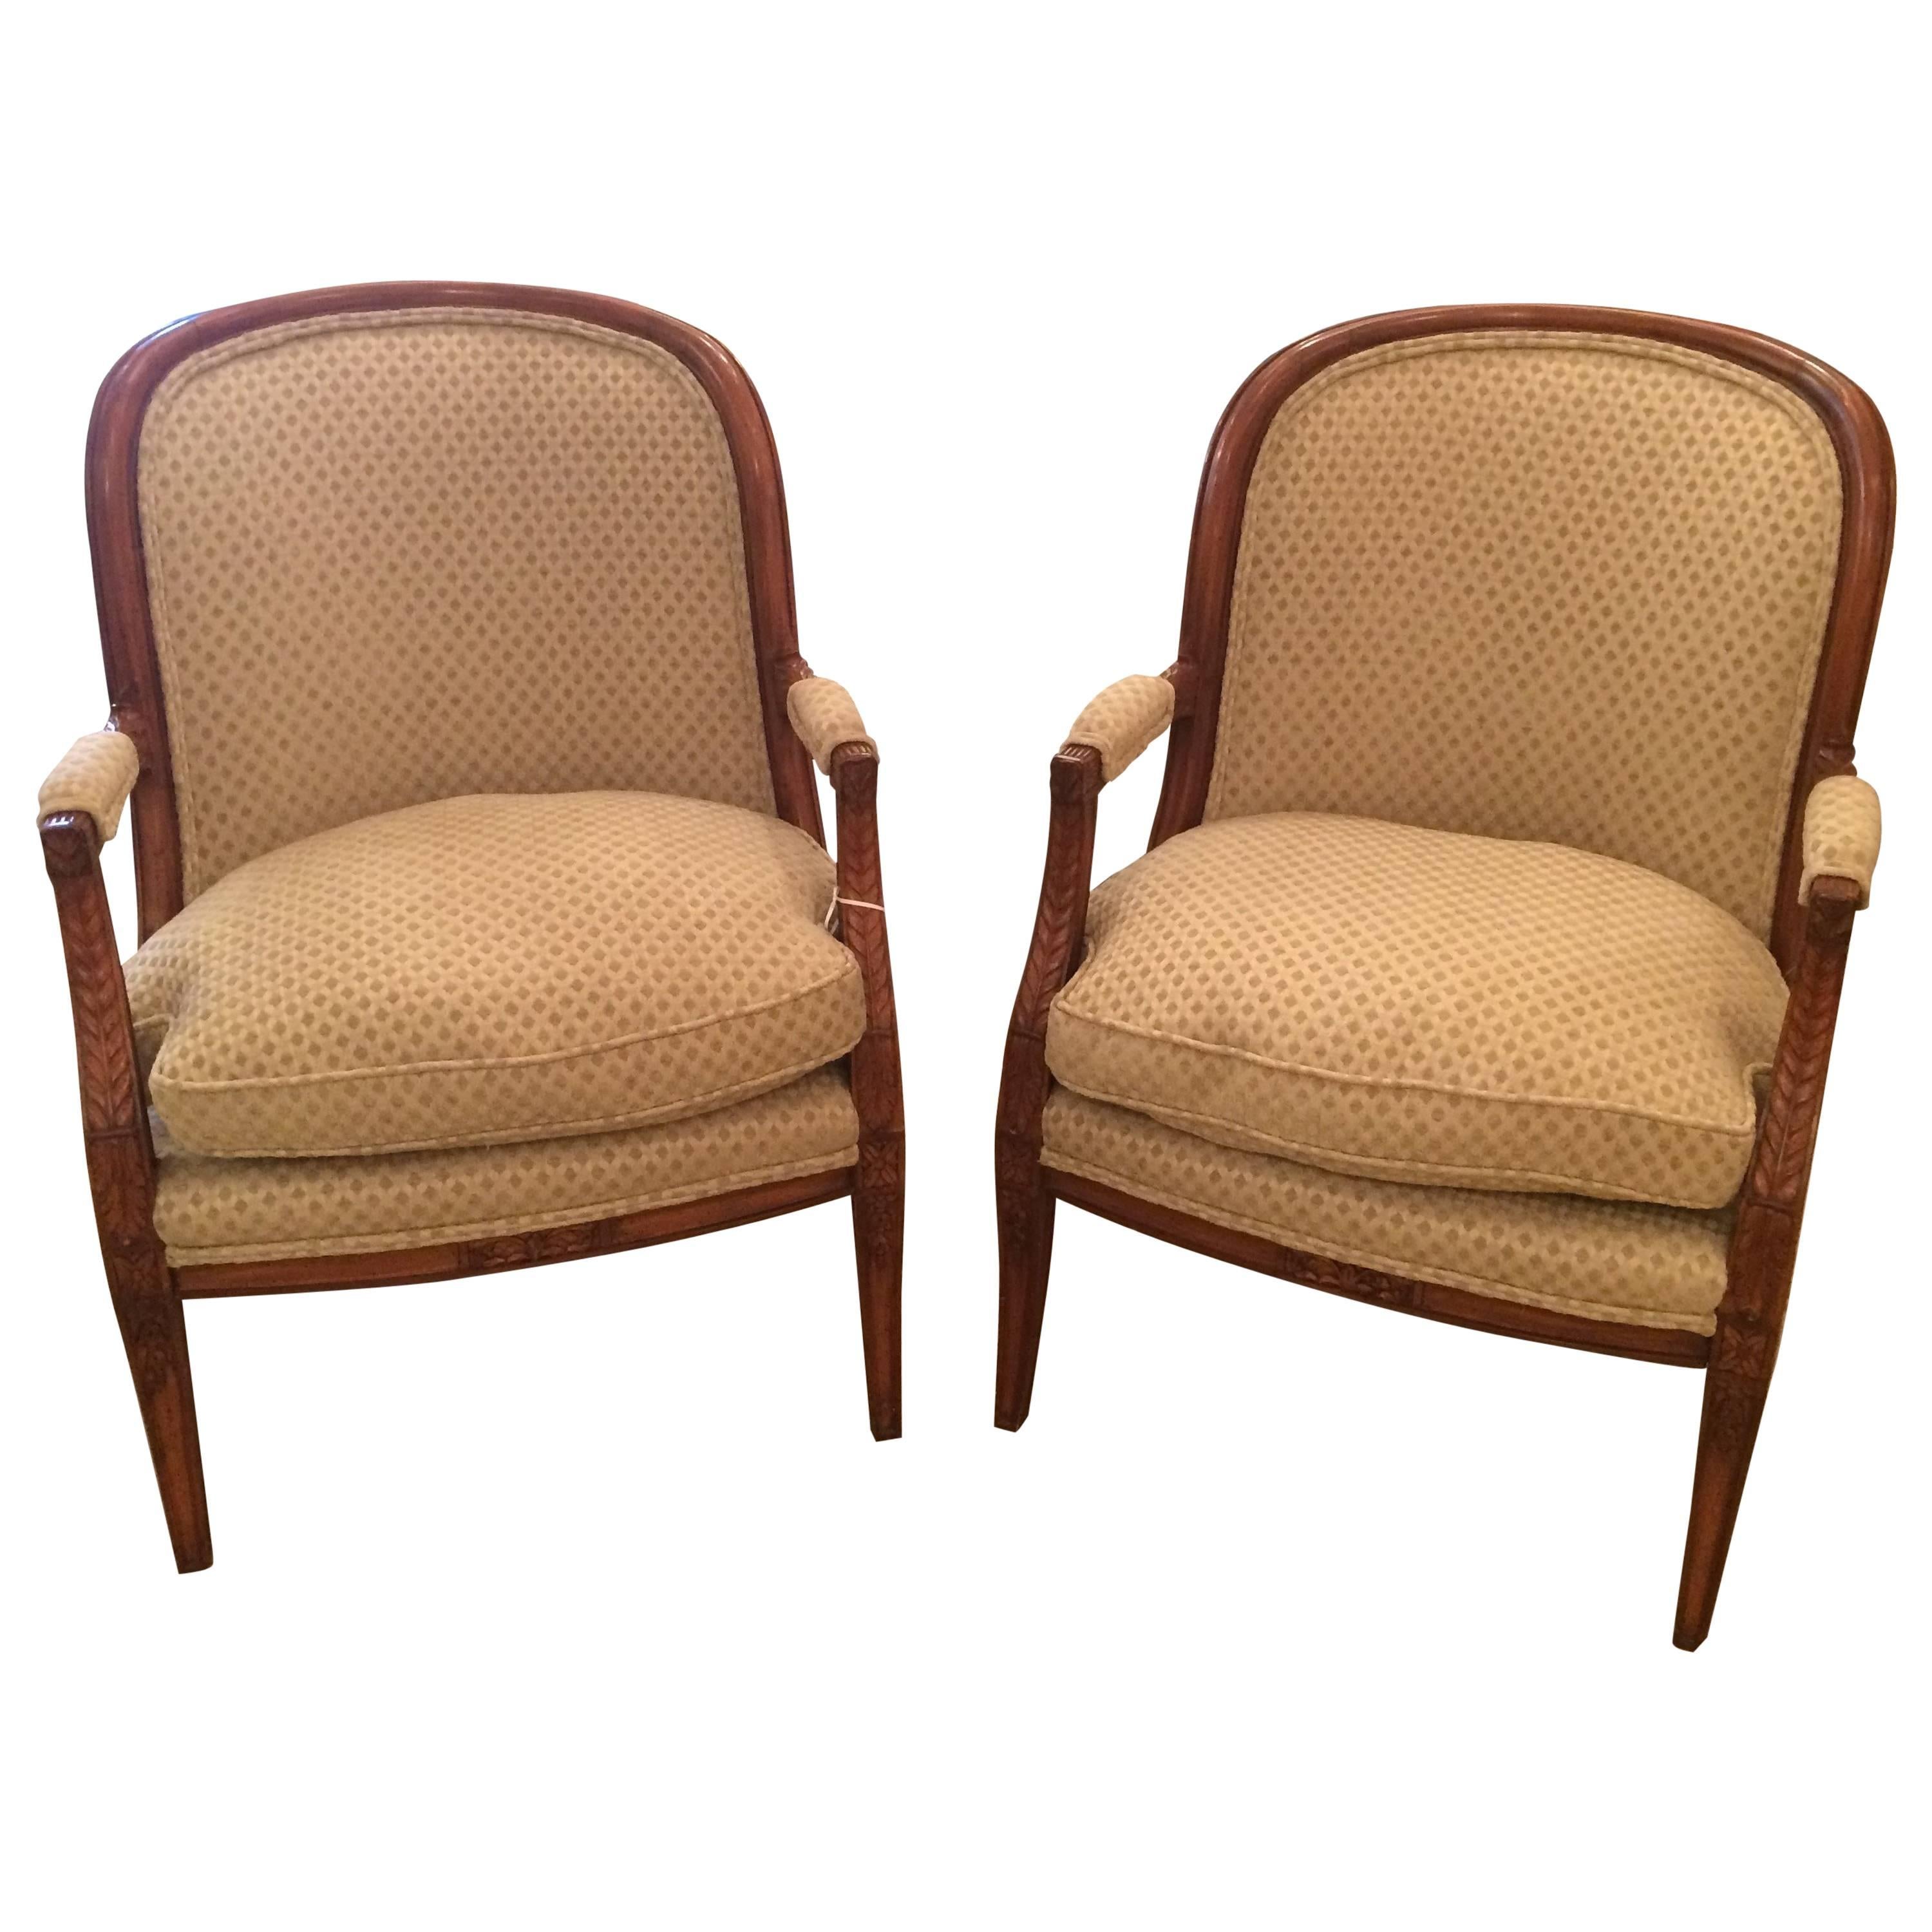 Classic Pair of French Walnut Tub Shaped Bergere Chairs